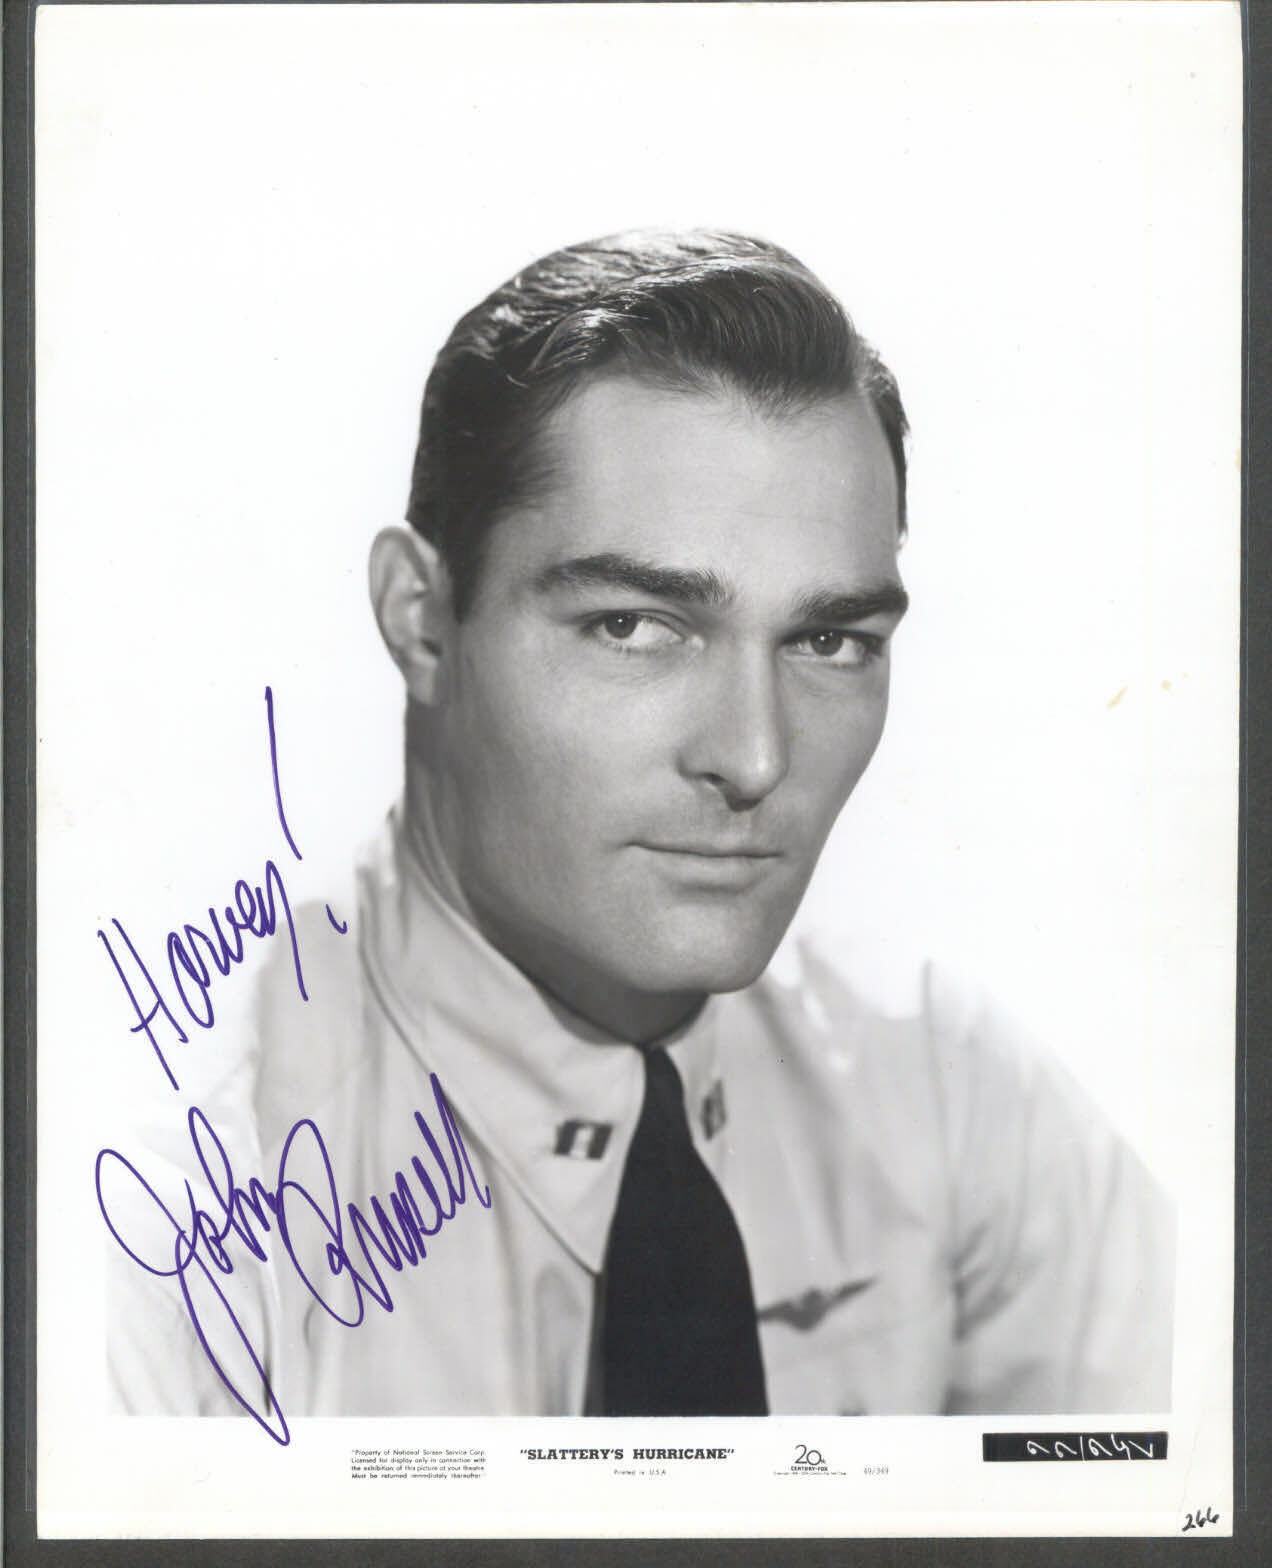 John Russell - Signed Vintage Celebrity Autograph Photo Poster painting - Slattery's Hurricane